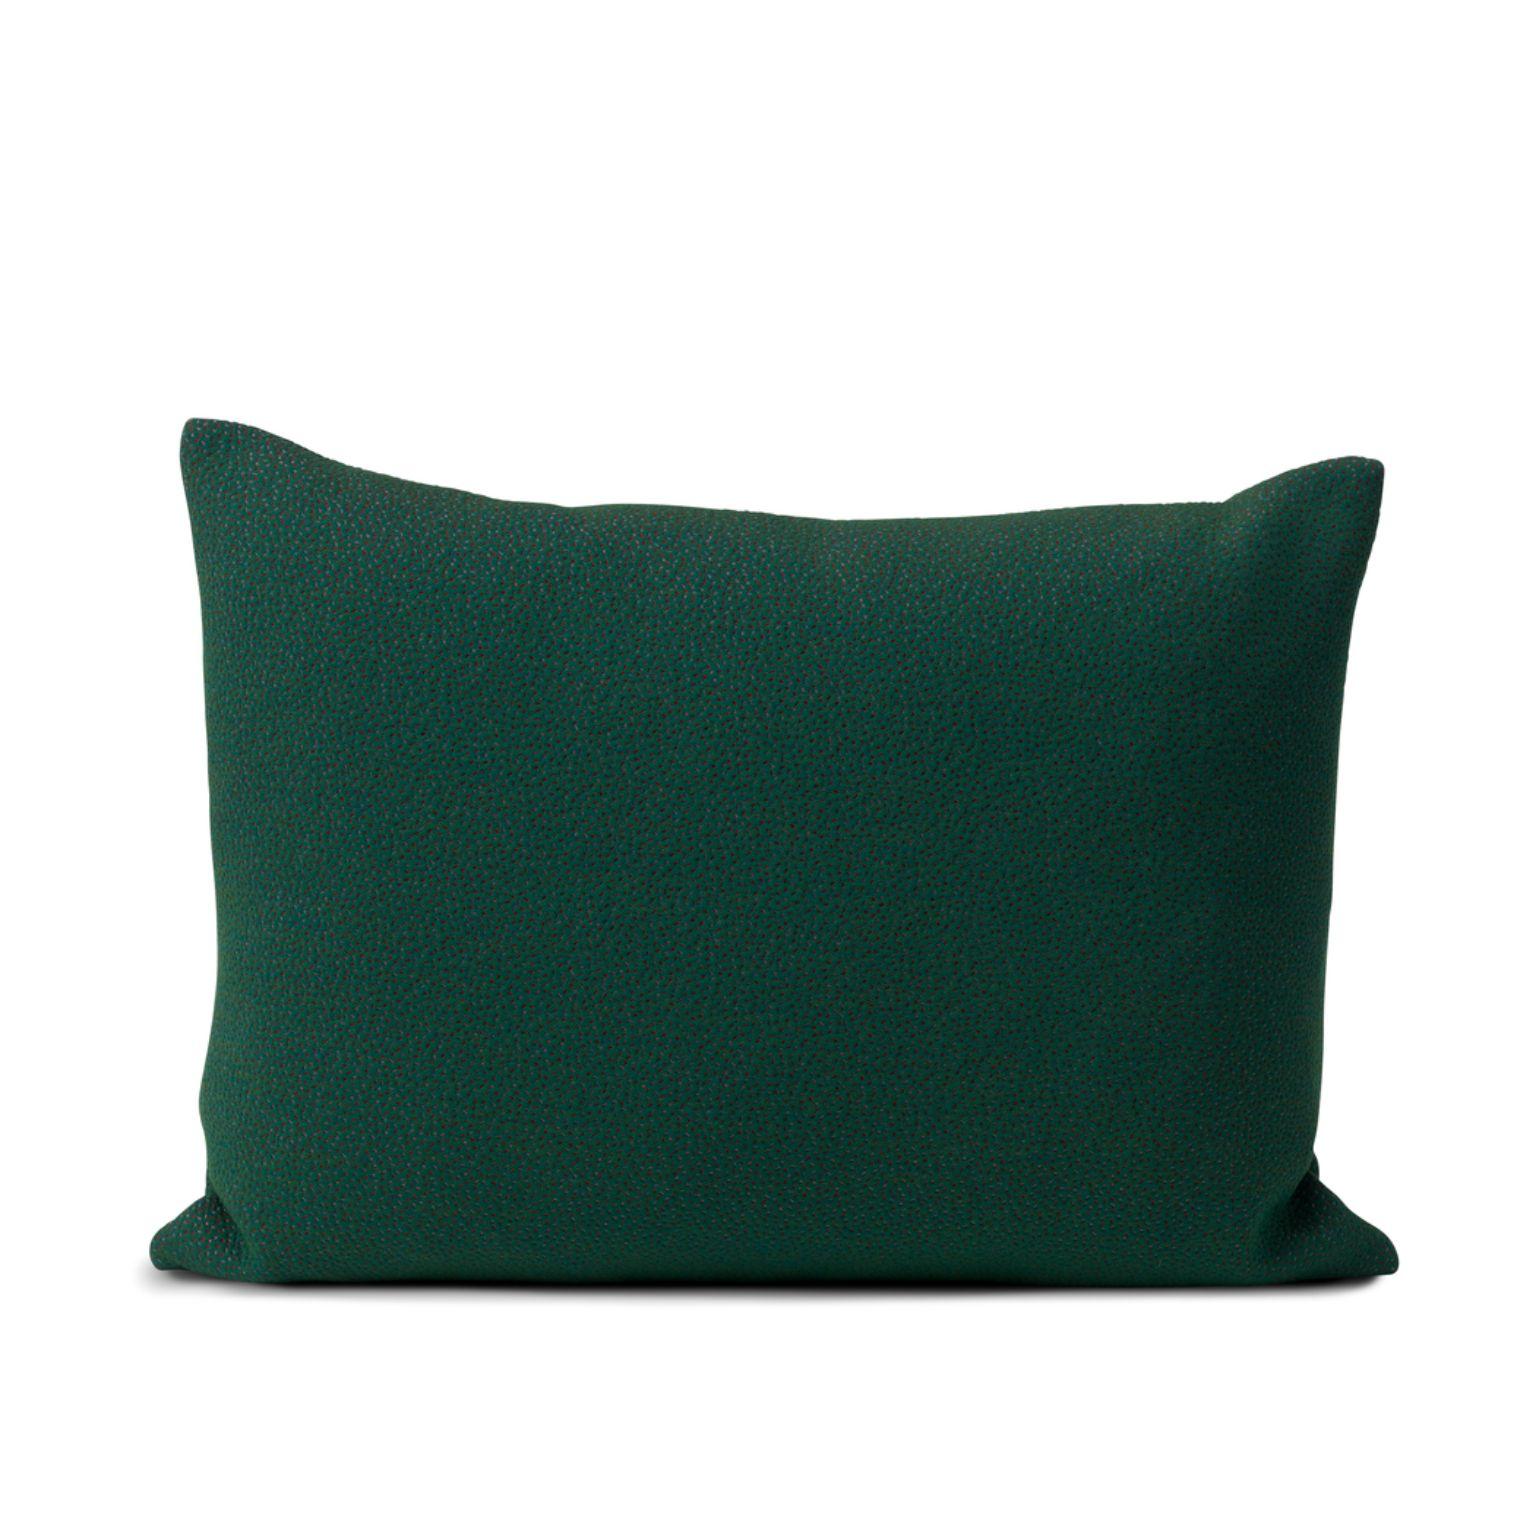 Galore cushion square sprinkles hunter green by Warm Nordic
Dimensions: D70 x H 50 cm
Material: Textile upholstery, Granulate and feathers filling.
Weight: 1.4 kg
Also available in different colours and finishes. 

An elegant oversized sofa